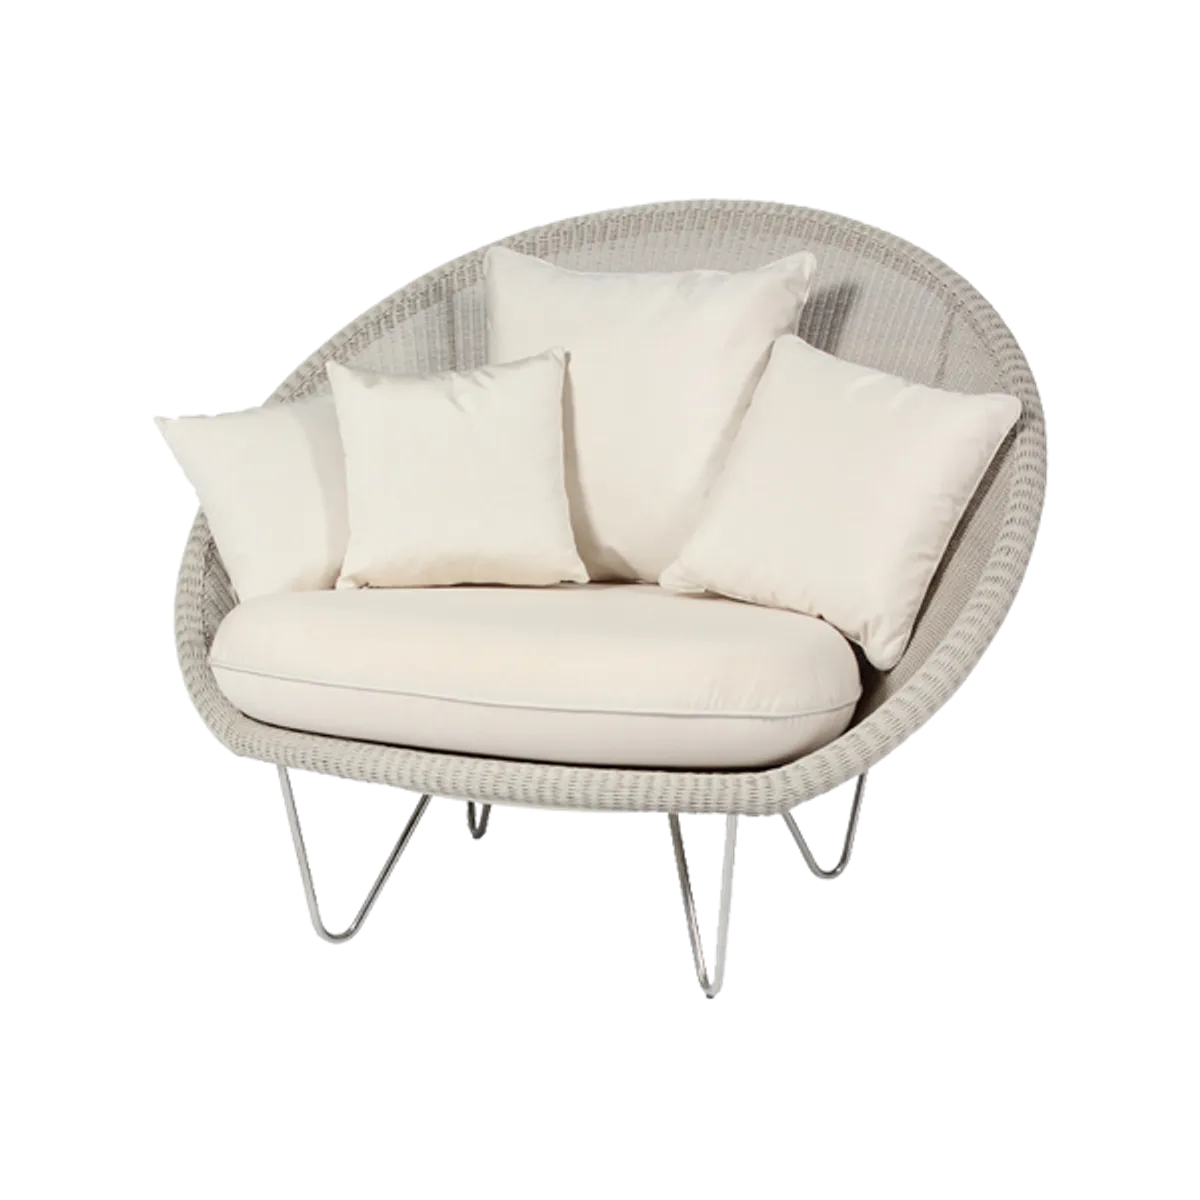 Web Udon lounge Chair